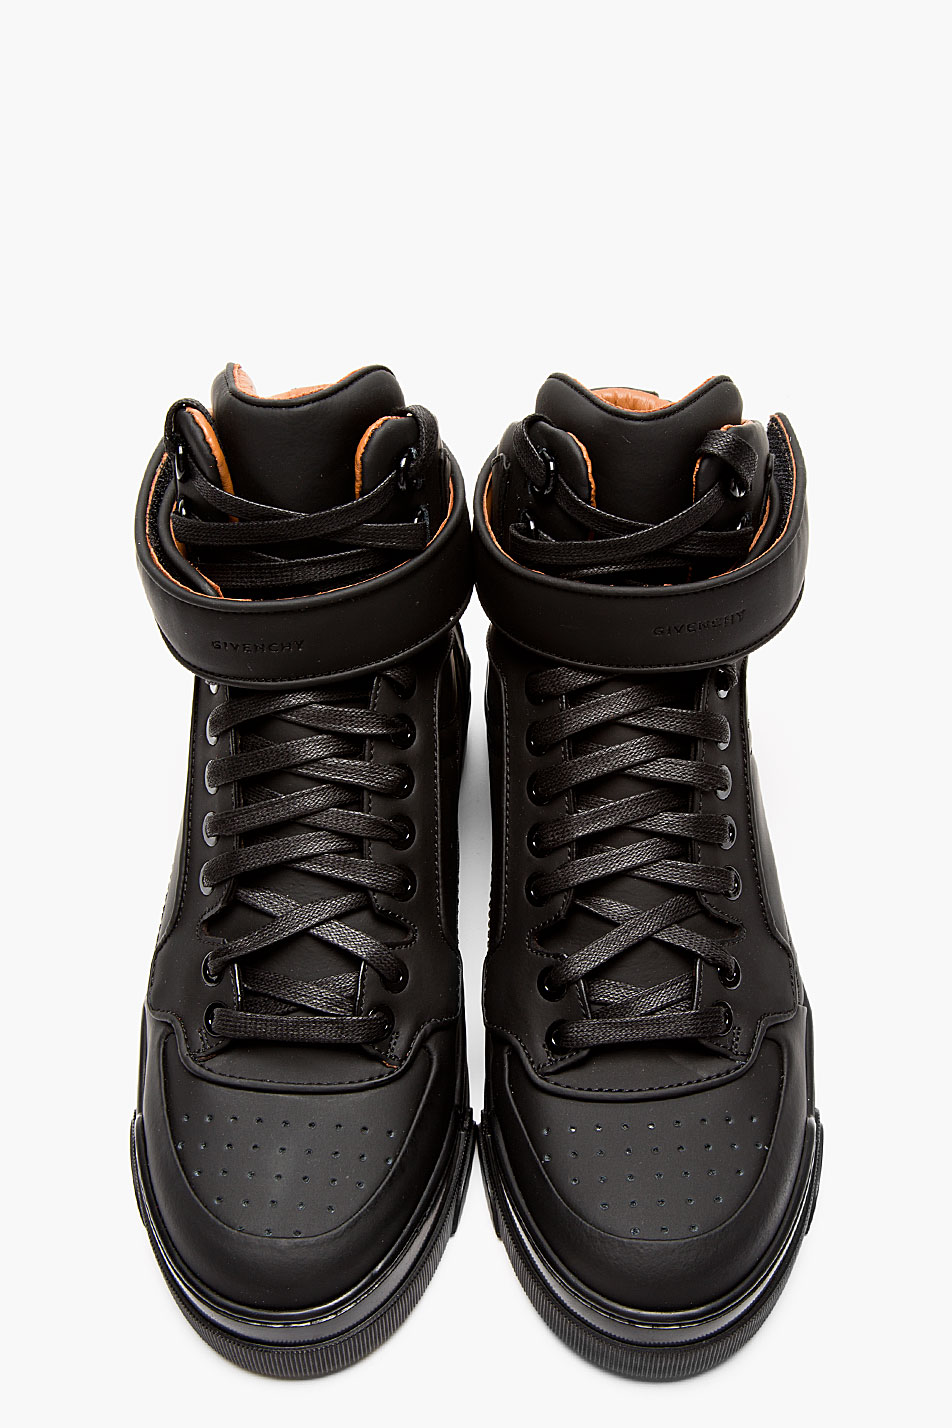 Lyst - Givenchy Black Matte Leather High_top Tyson Sneakers in Black